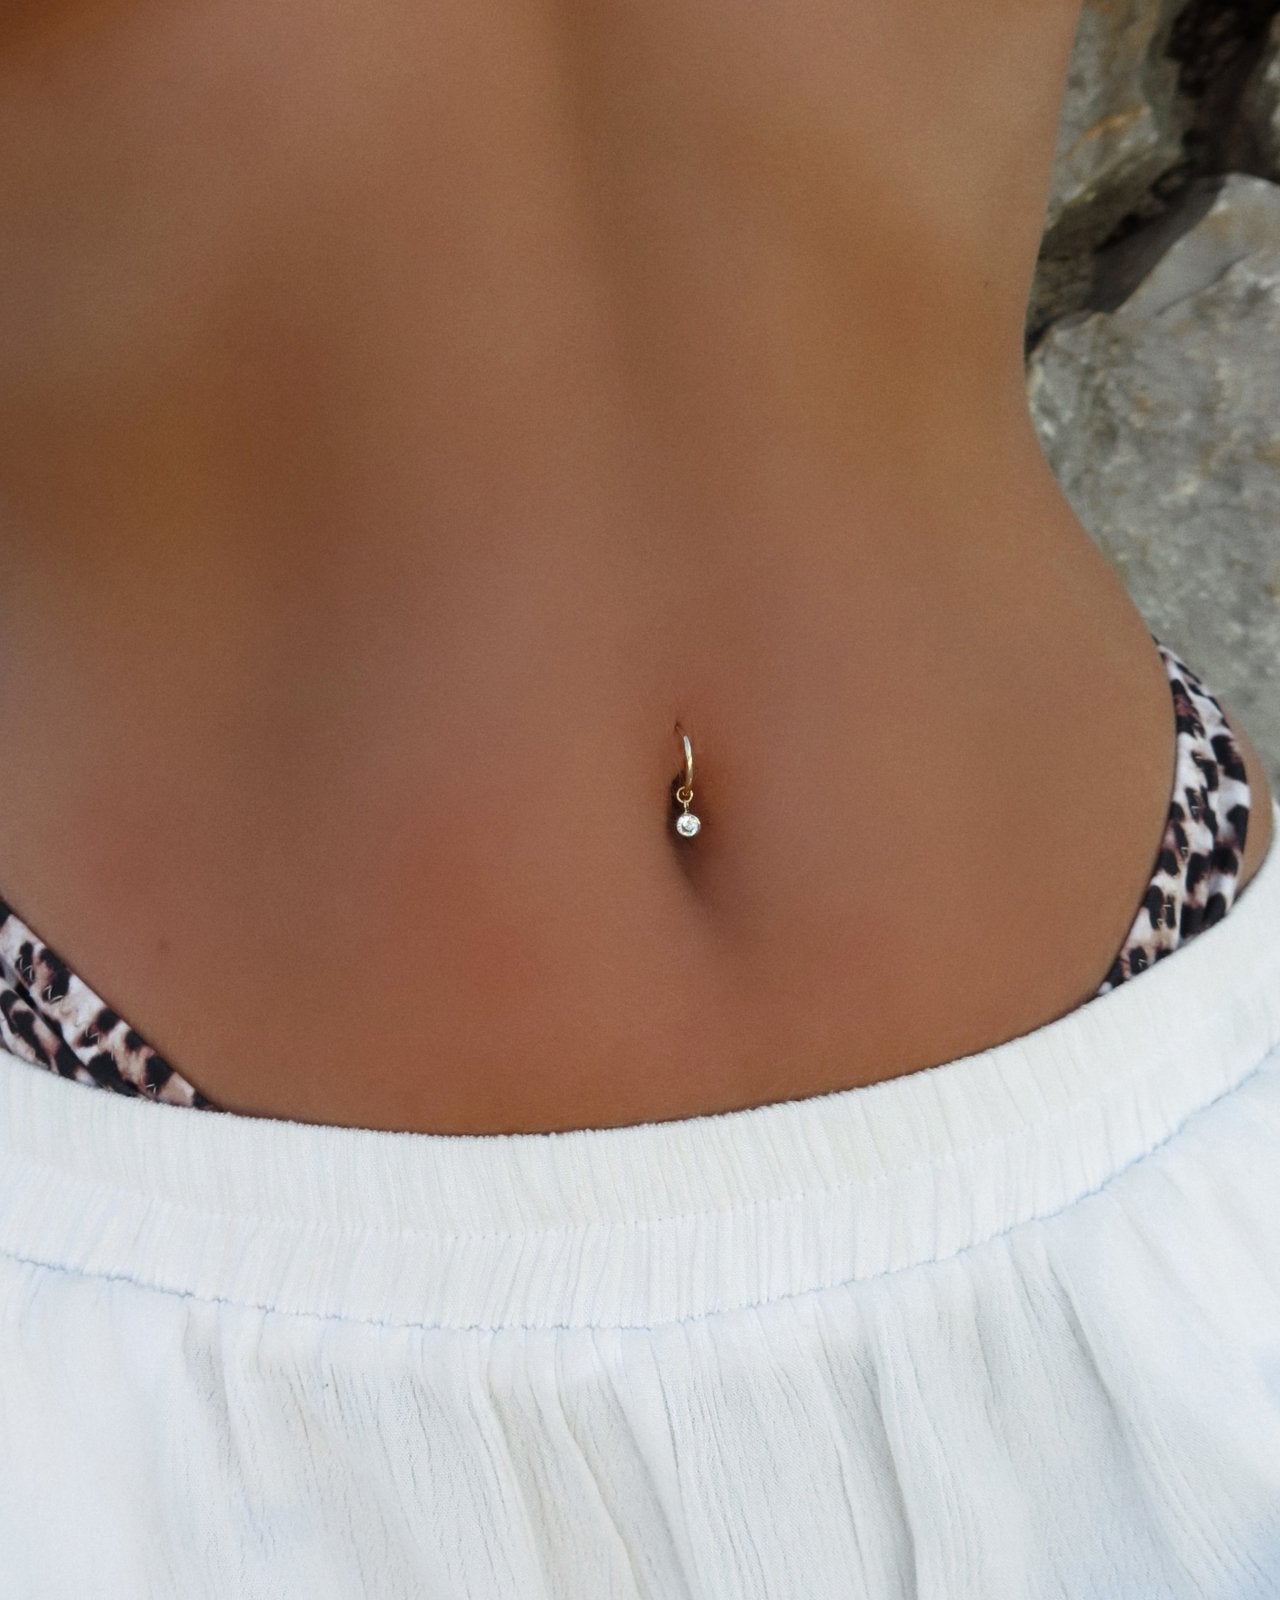 A Long List of Belly Button Piercing Problems - TatRing